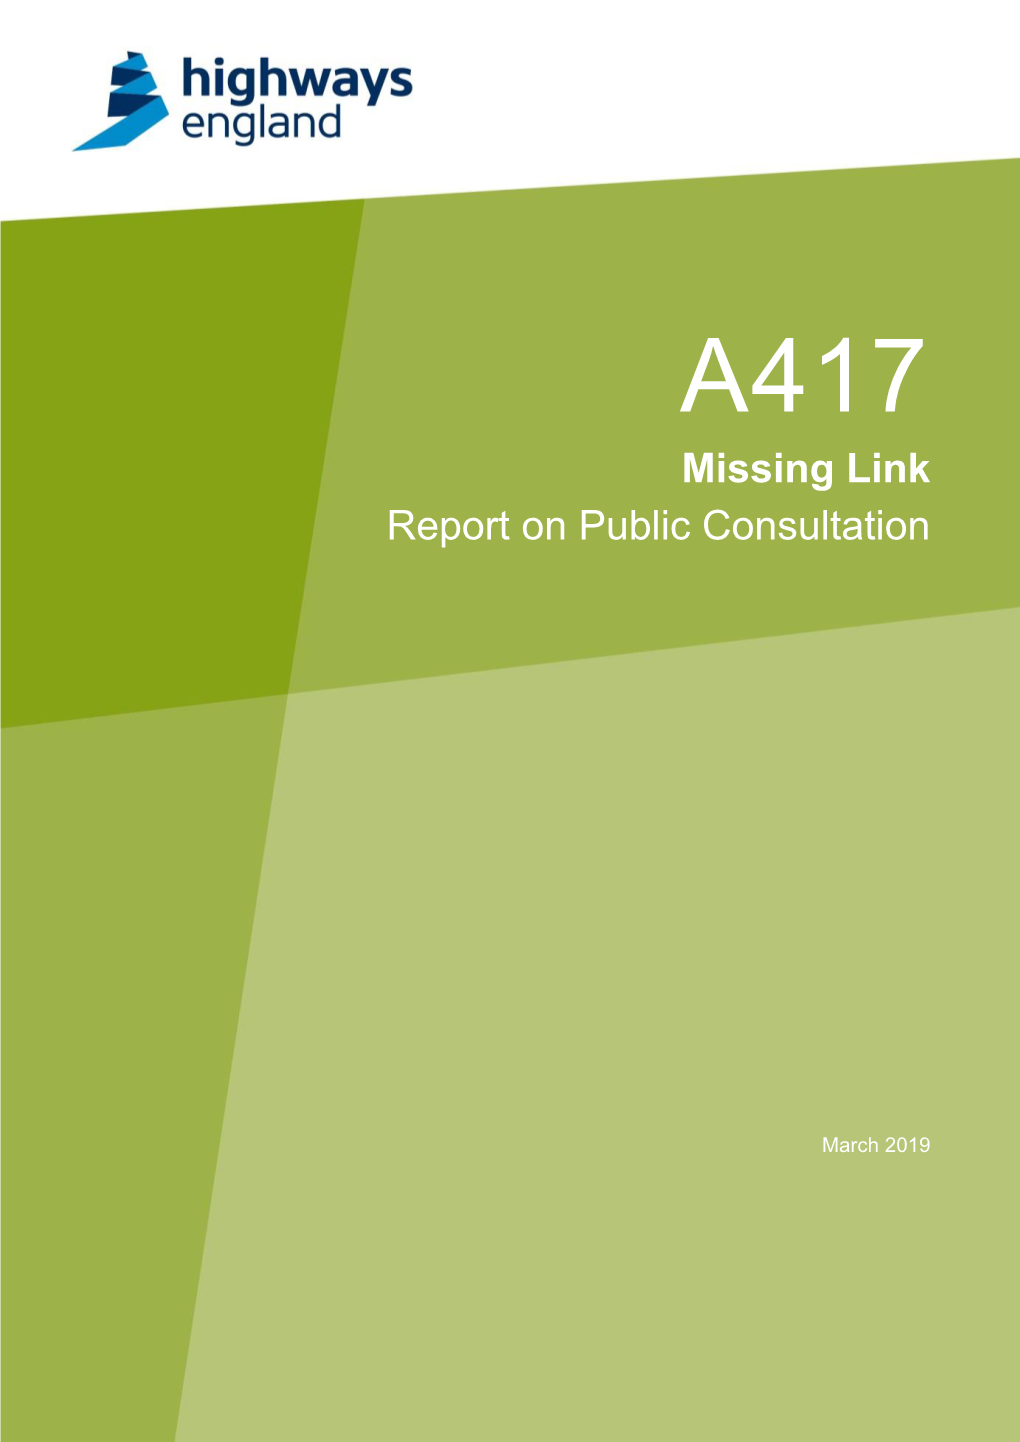 A417 Missing Link – Report on Public Consultation